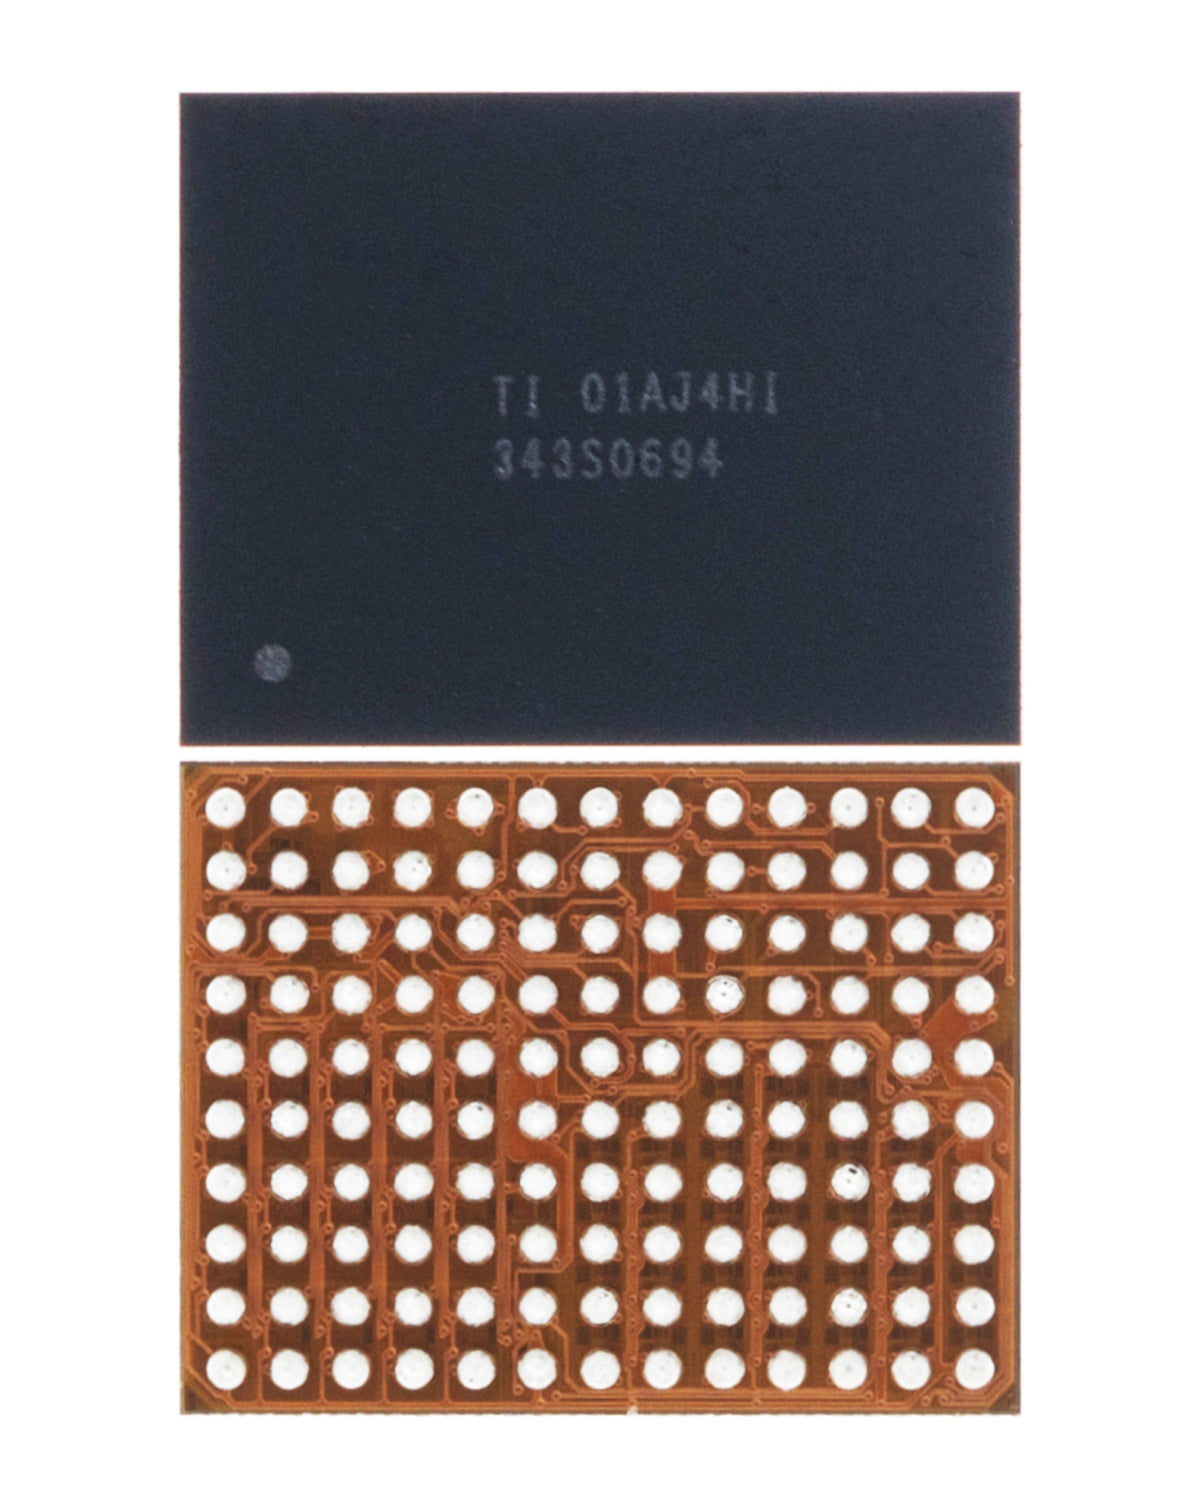 MESON - TOUCHSCREEN / DIGITIZER CONTROLLER IC CHIP COMPATIBLE WITH IPHONE 6 / 6 PLUS (U2402 / 343S0694 / 130 PINS)